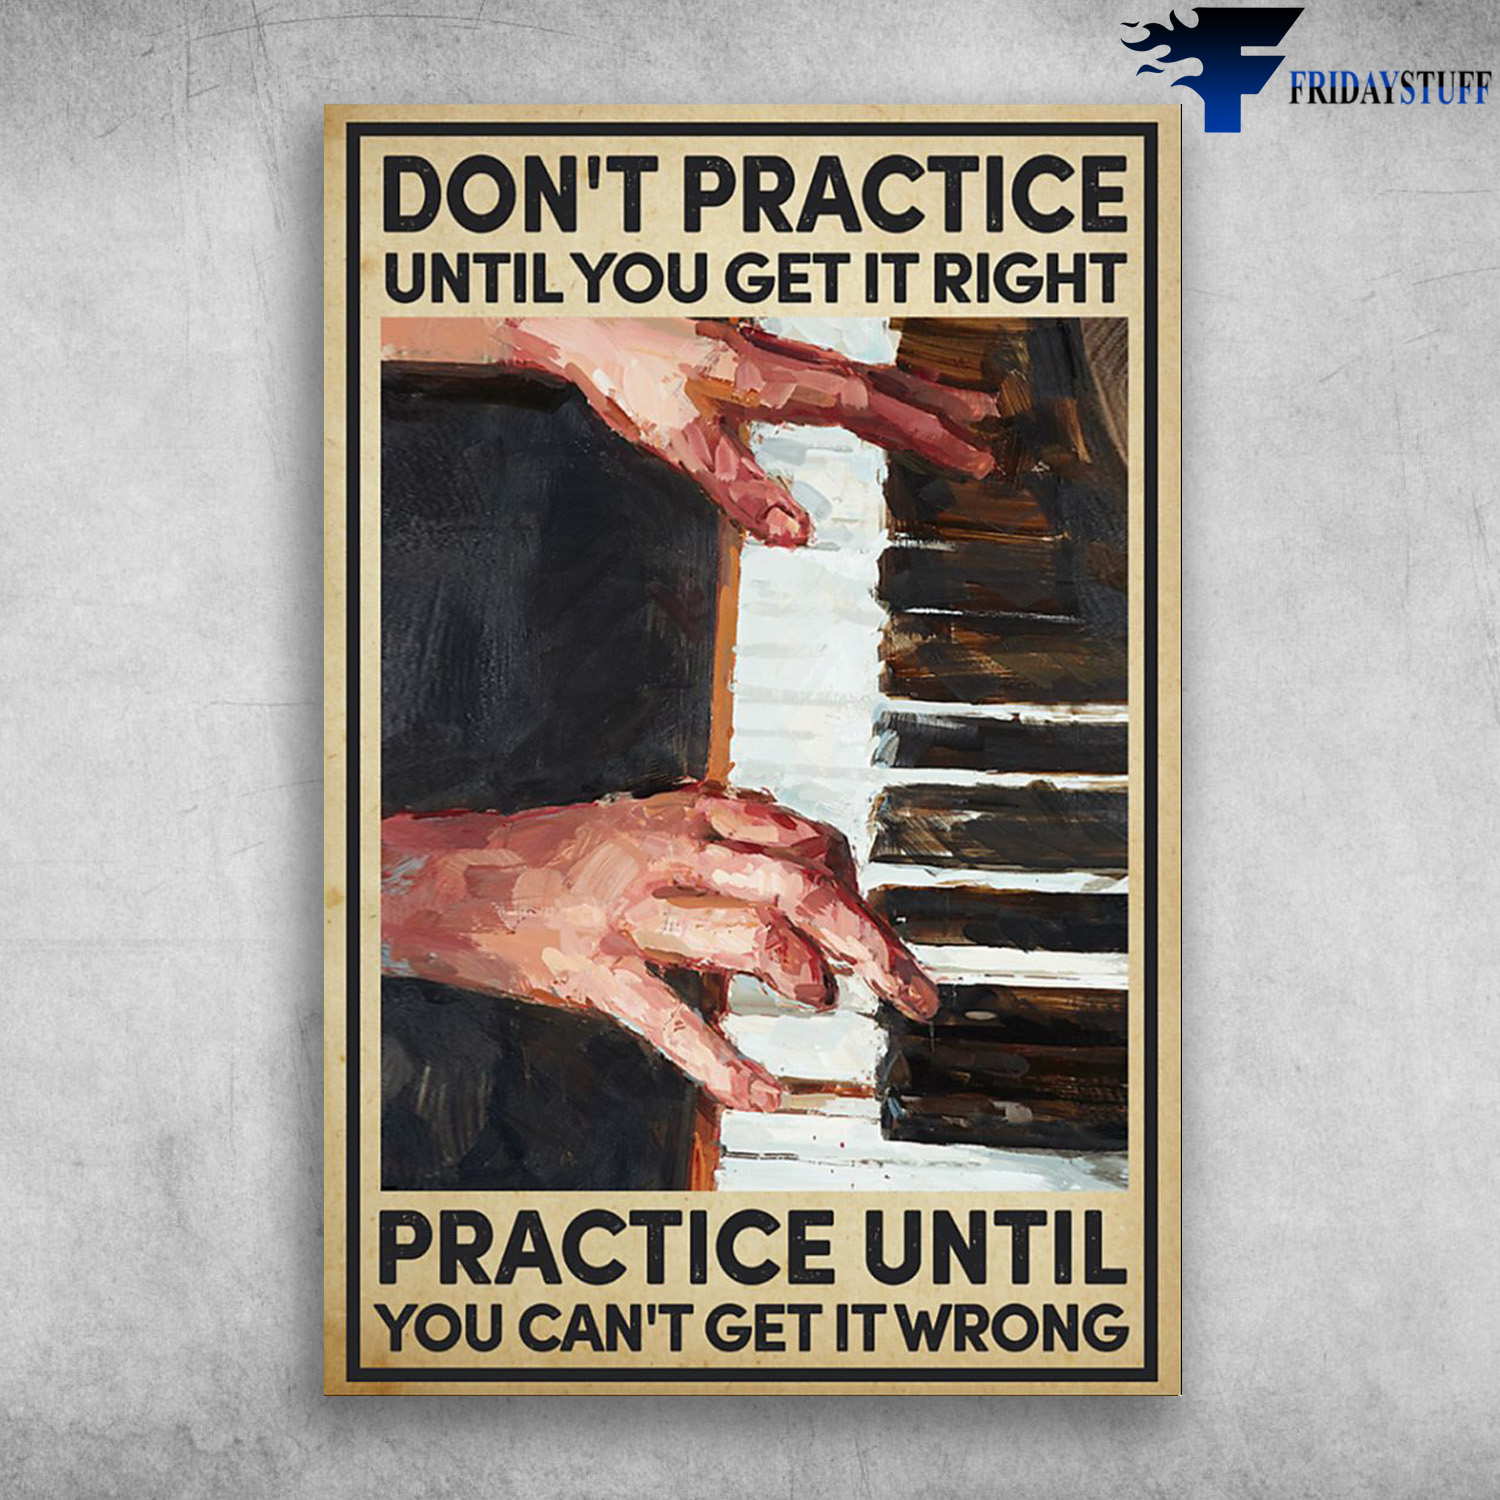 Play The Piano - Don't Practice Until You Get It Right, Practice Until You Can't Get It Wrong